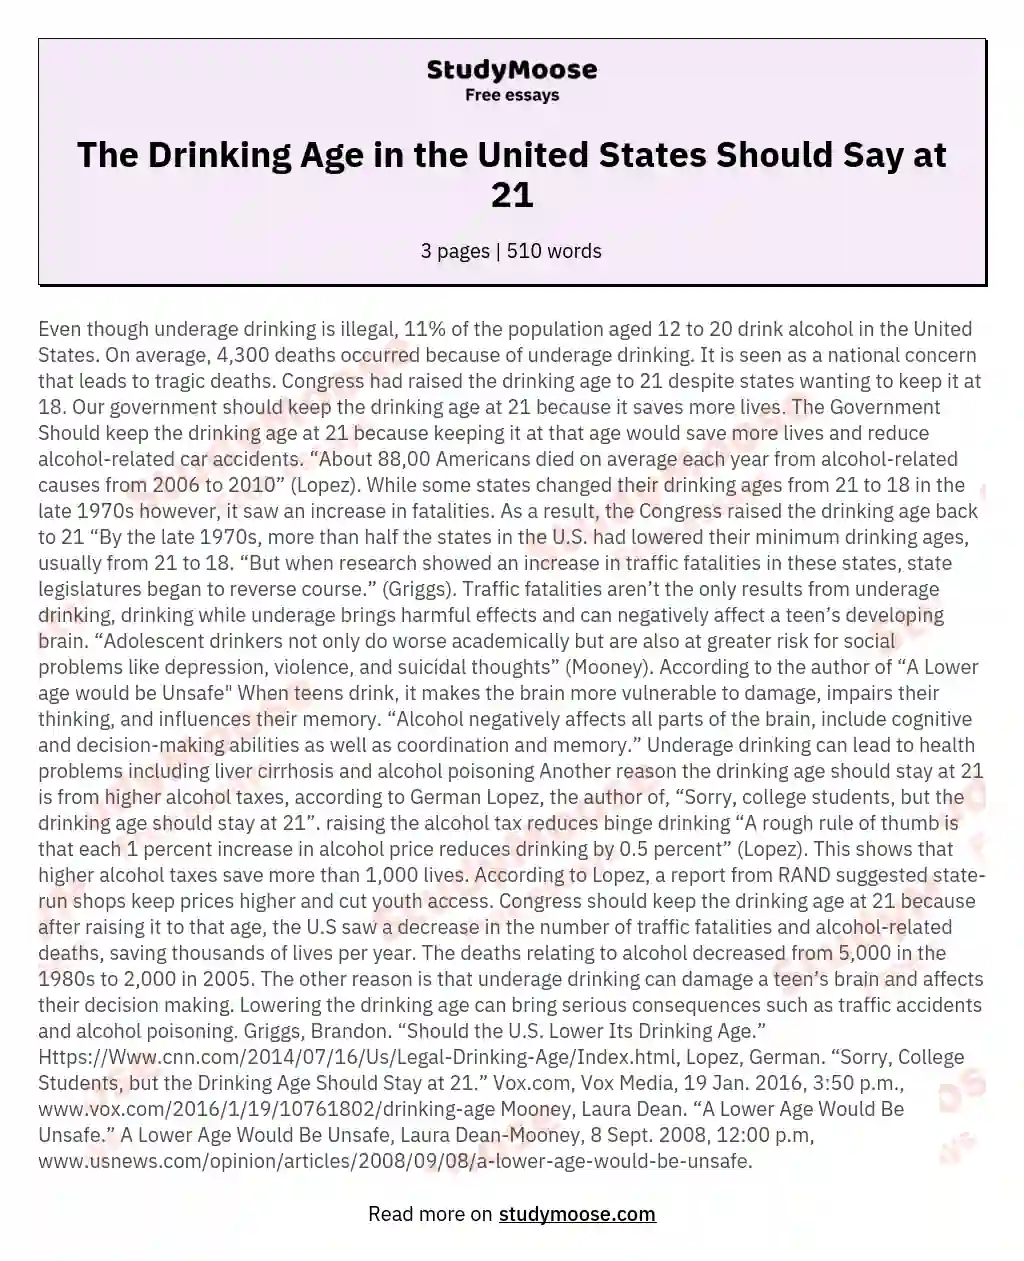 The Drinking Age in the United States Should Say at 21